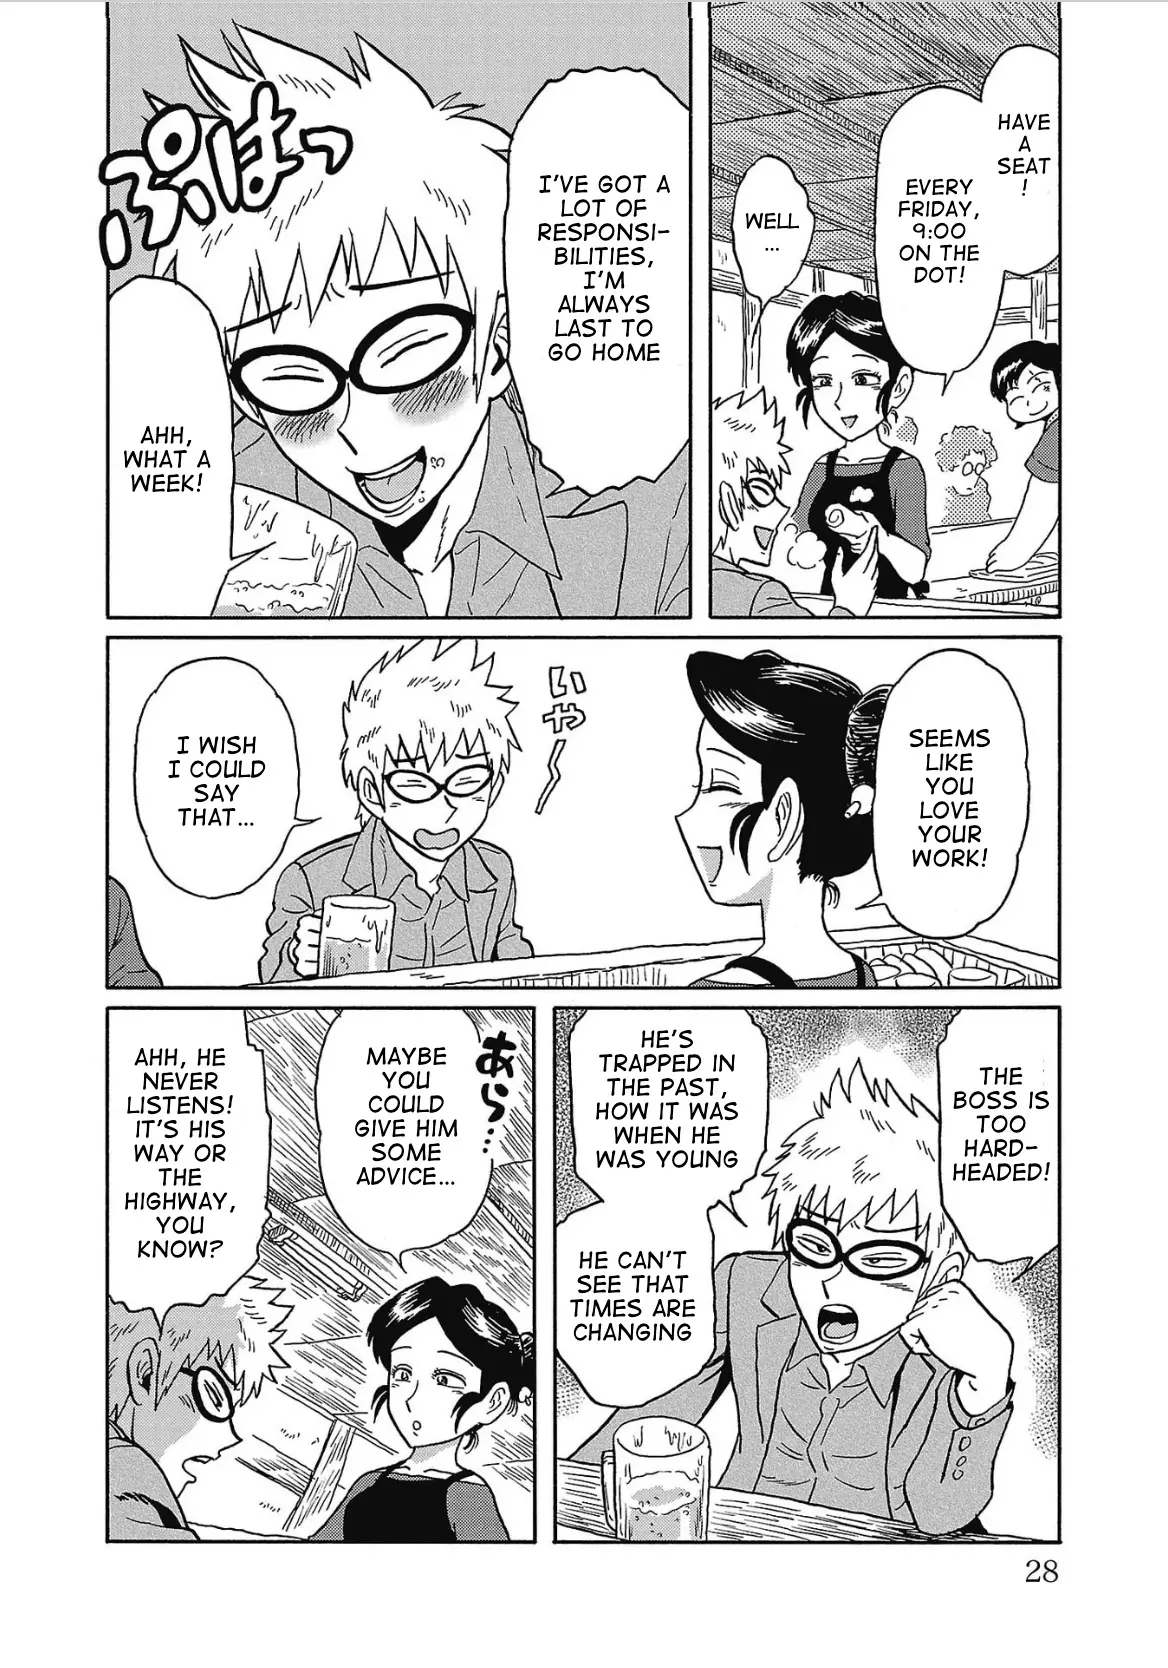 Haraiso Days - 14 page 8-9958cdc6